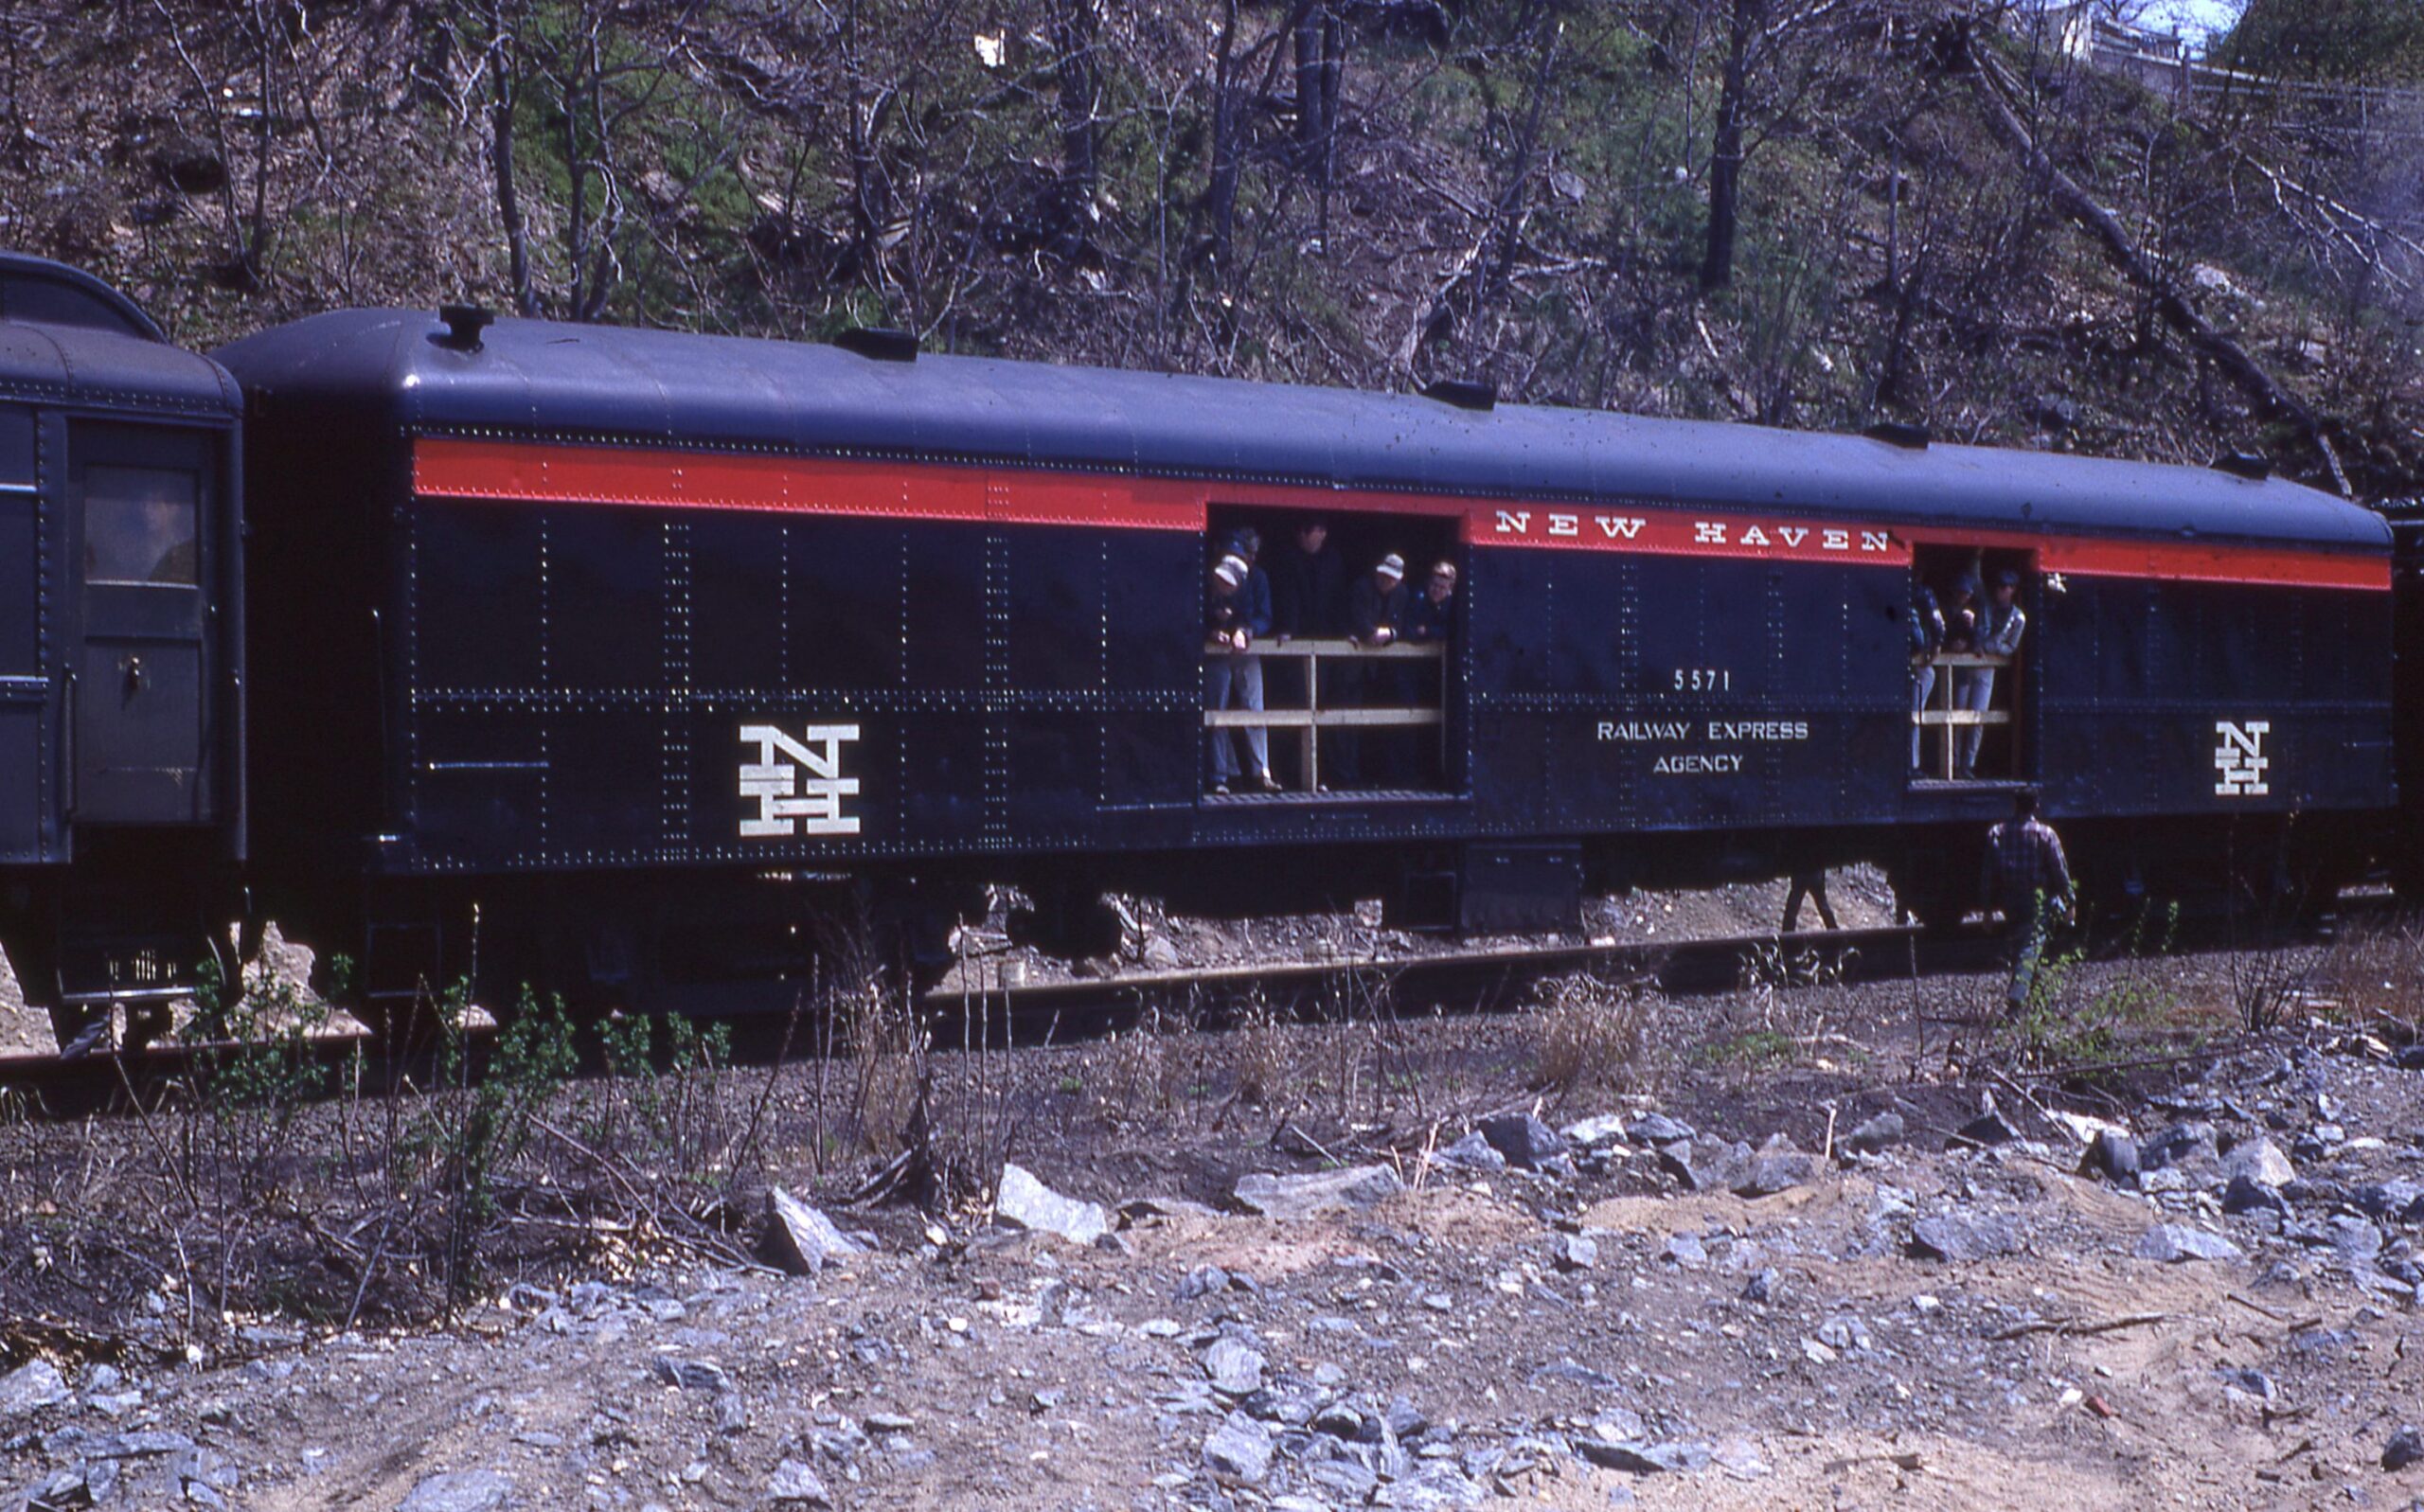 New Haven New York and Hartford Railroad | Norwich, Connecticut | Railway Express car #5571 | May 13, 1967 | Stanley Hauck photograph